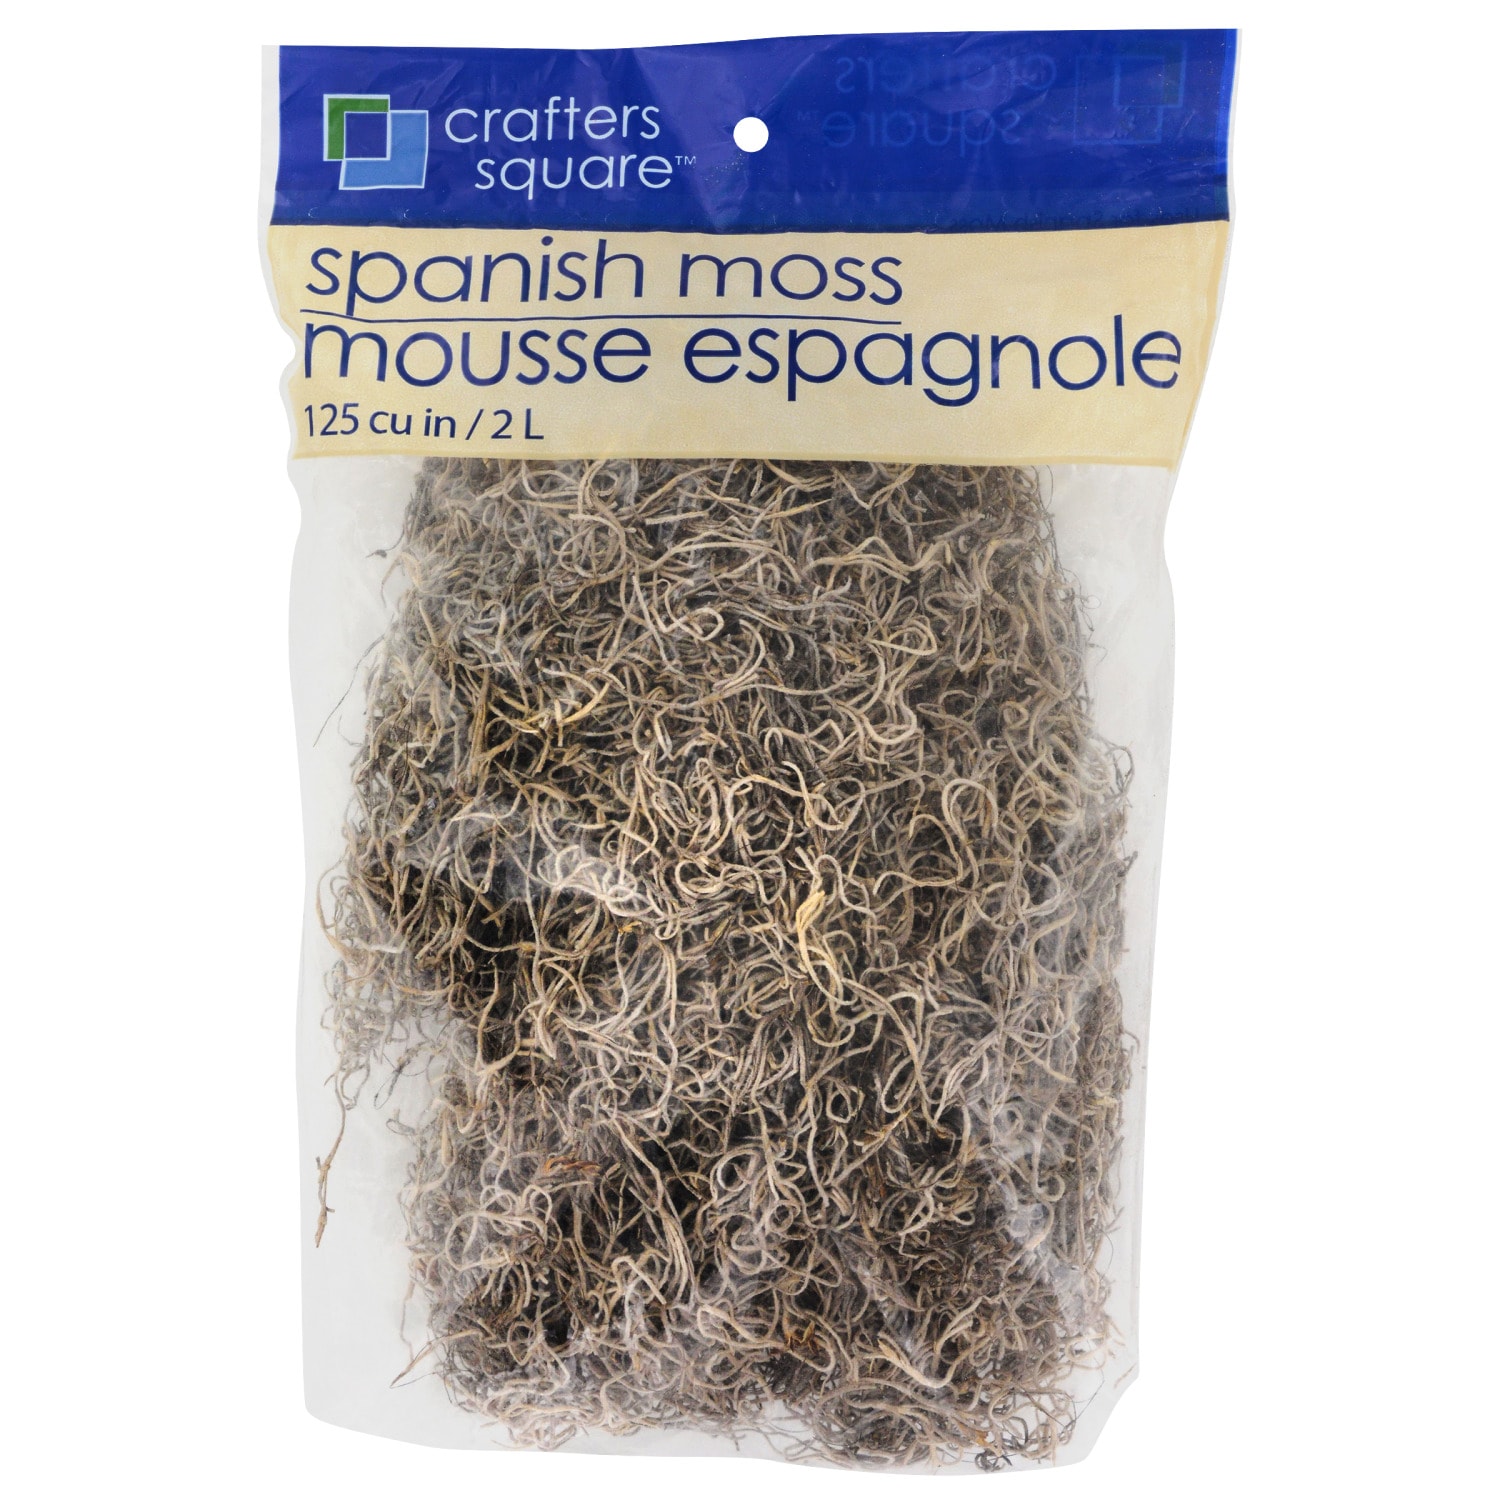 View Crafter's Square Spanish Moss, 125